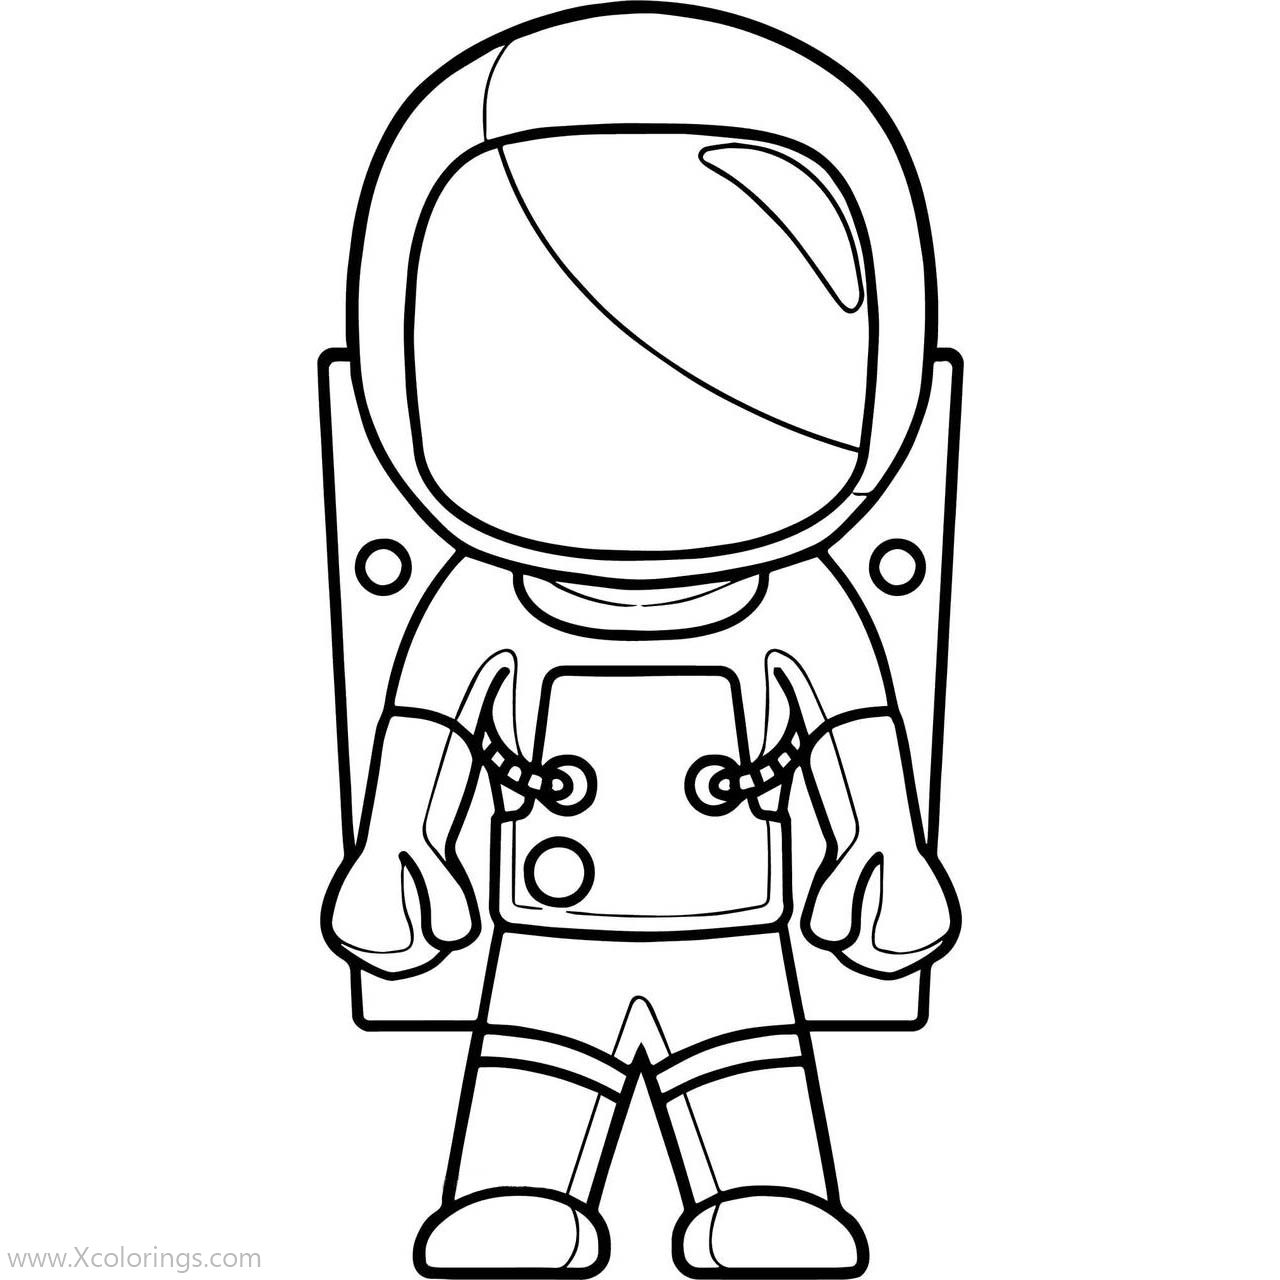 Free Easy Astronaut Coloring Pages printable